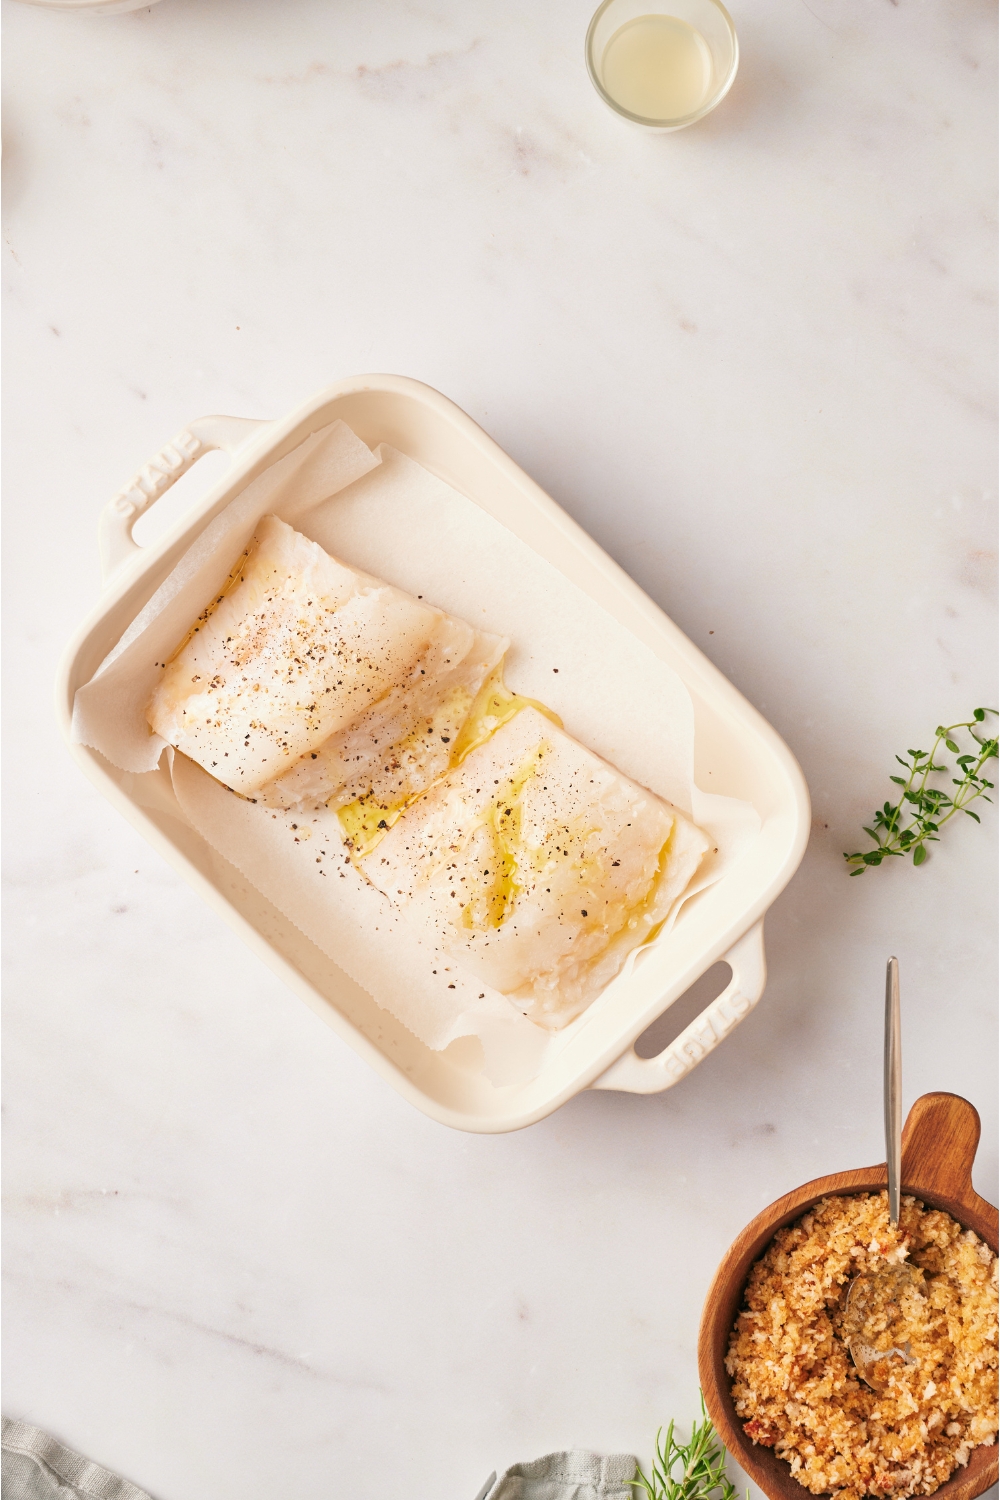 A baking dish with two cod fillets seasoned with lemon juice, salt, and pepper.